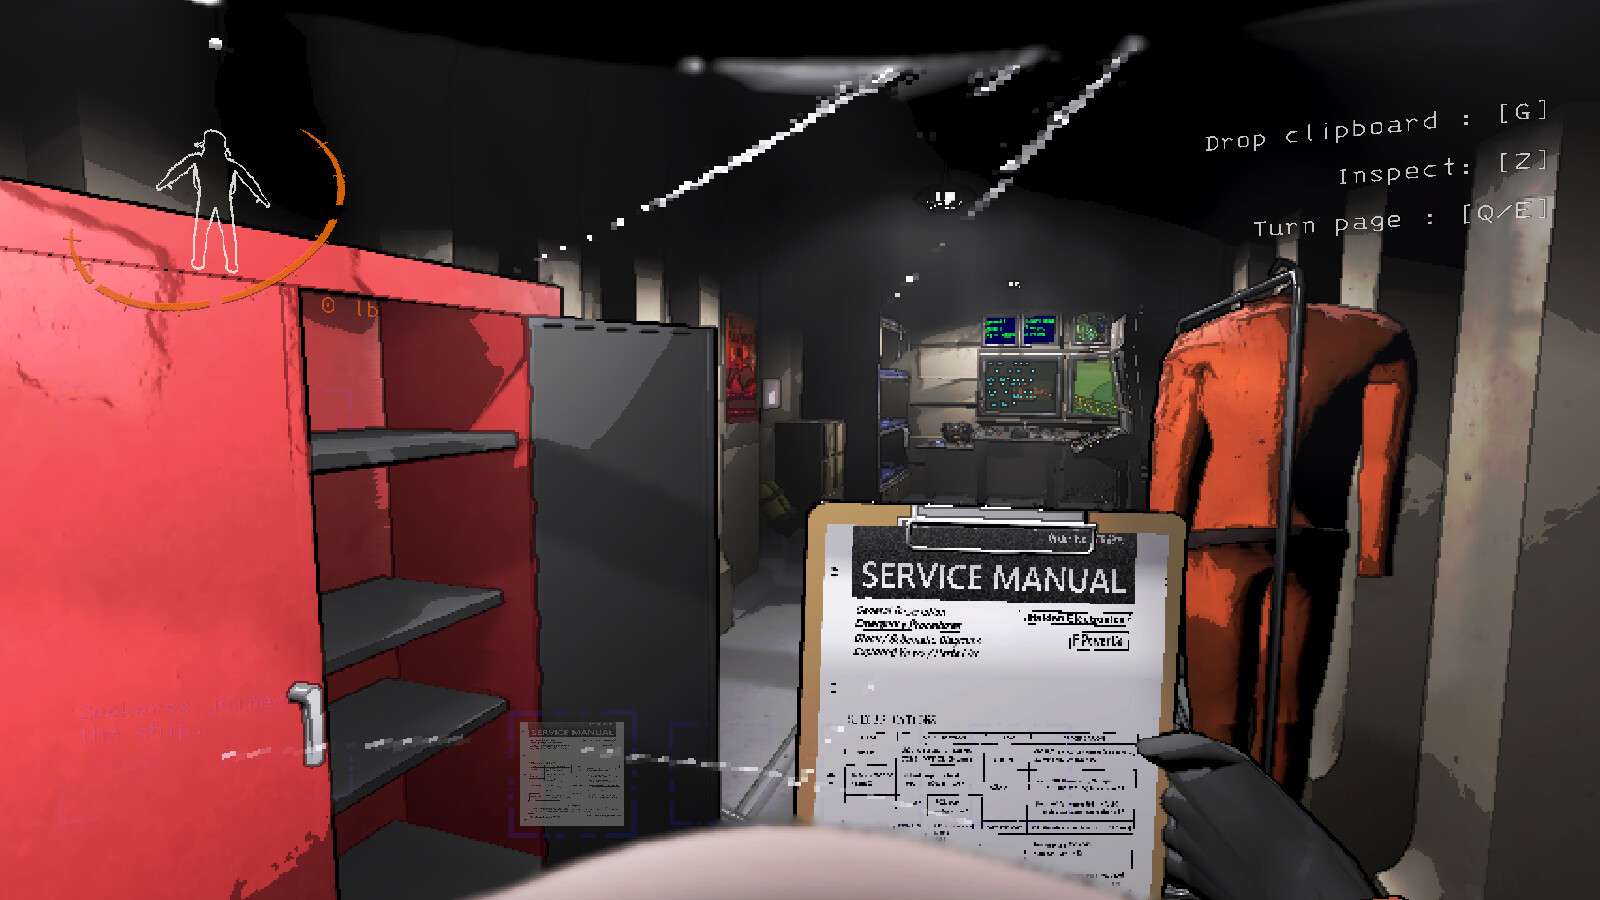 A screenshot from the game Lethal Company